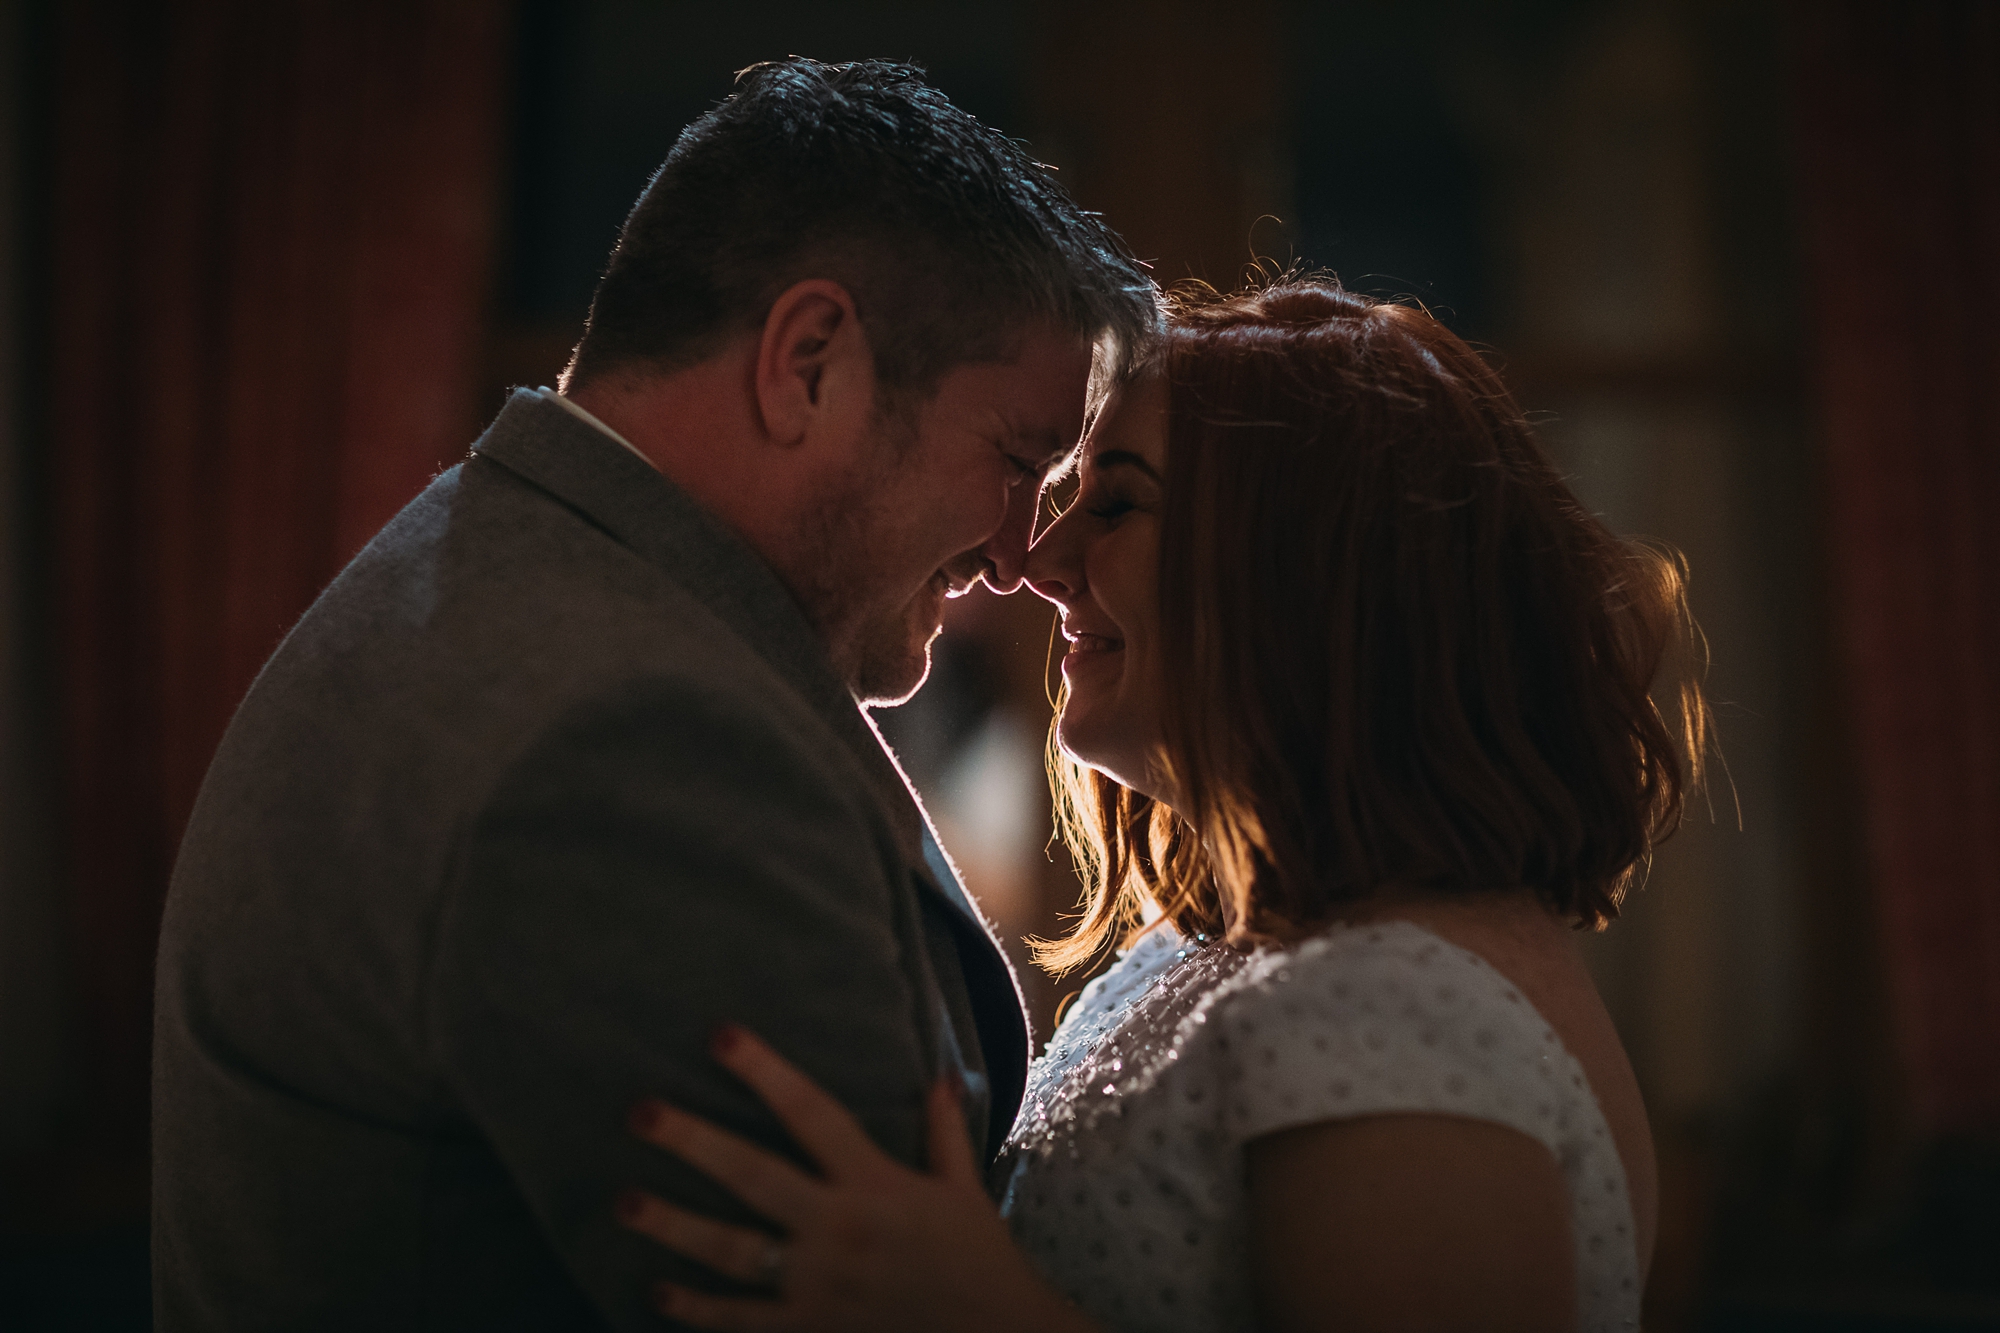 best wedding photographs - newlyweds embrace in low light